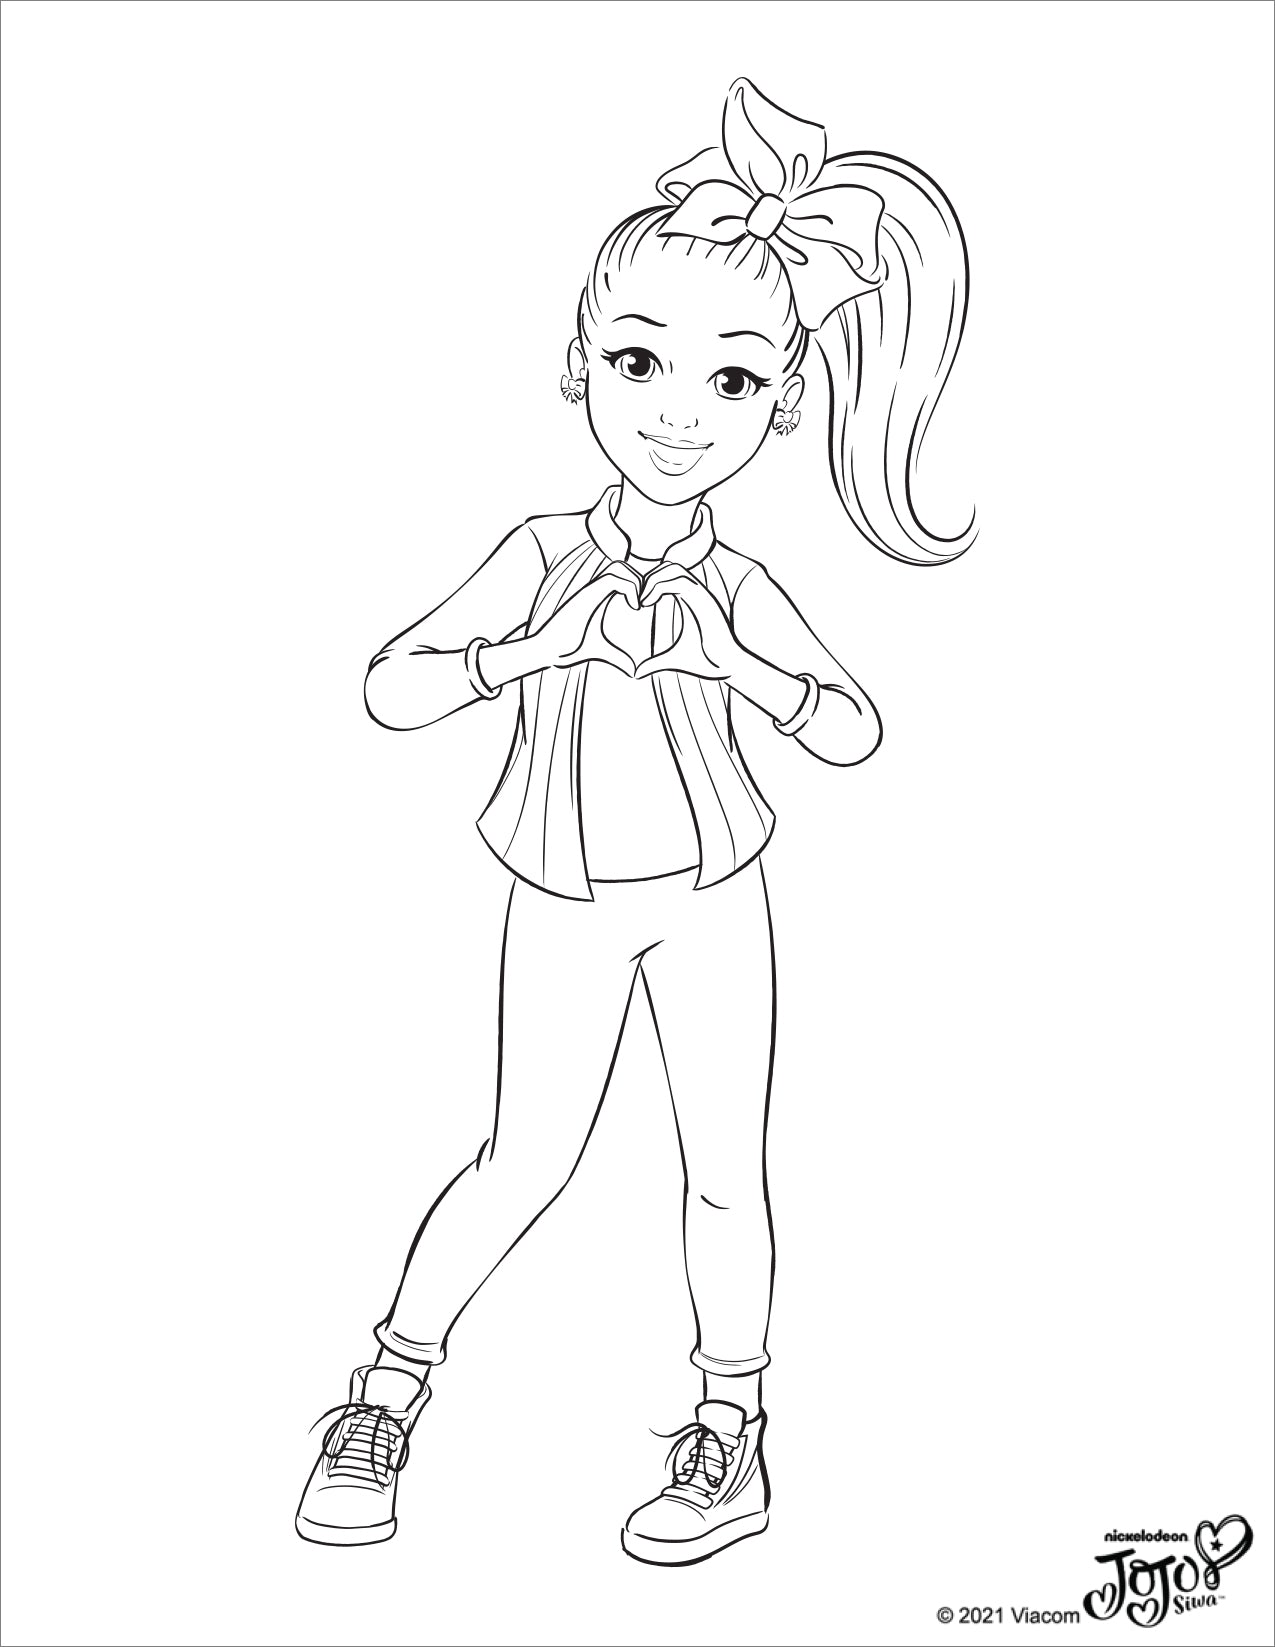 coloring-pages-of-jojo-siwa